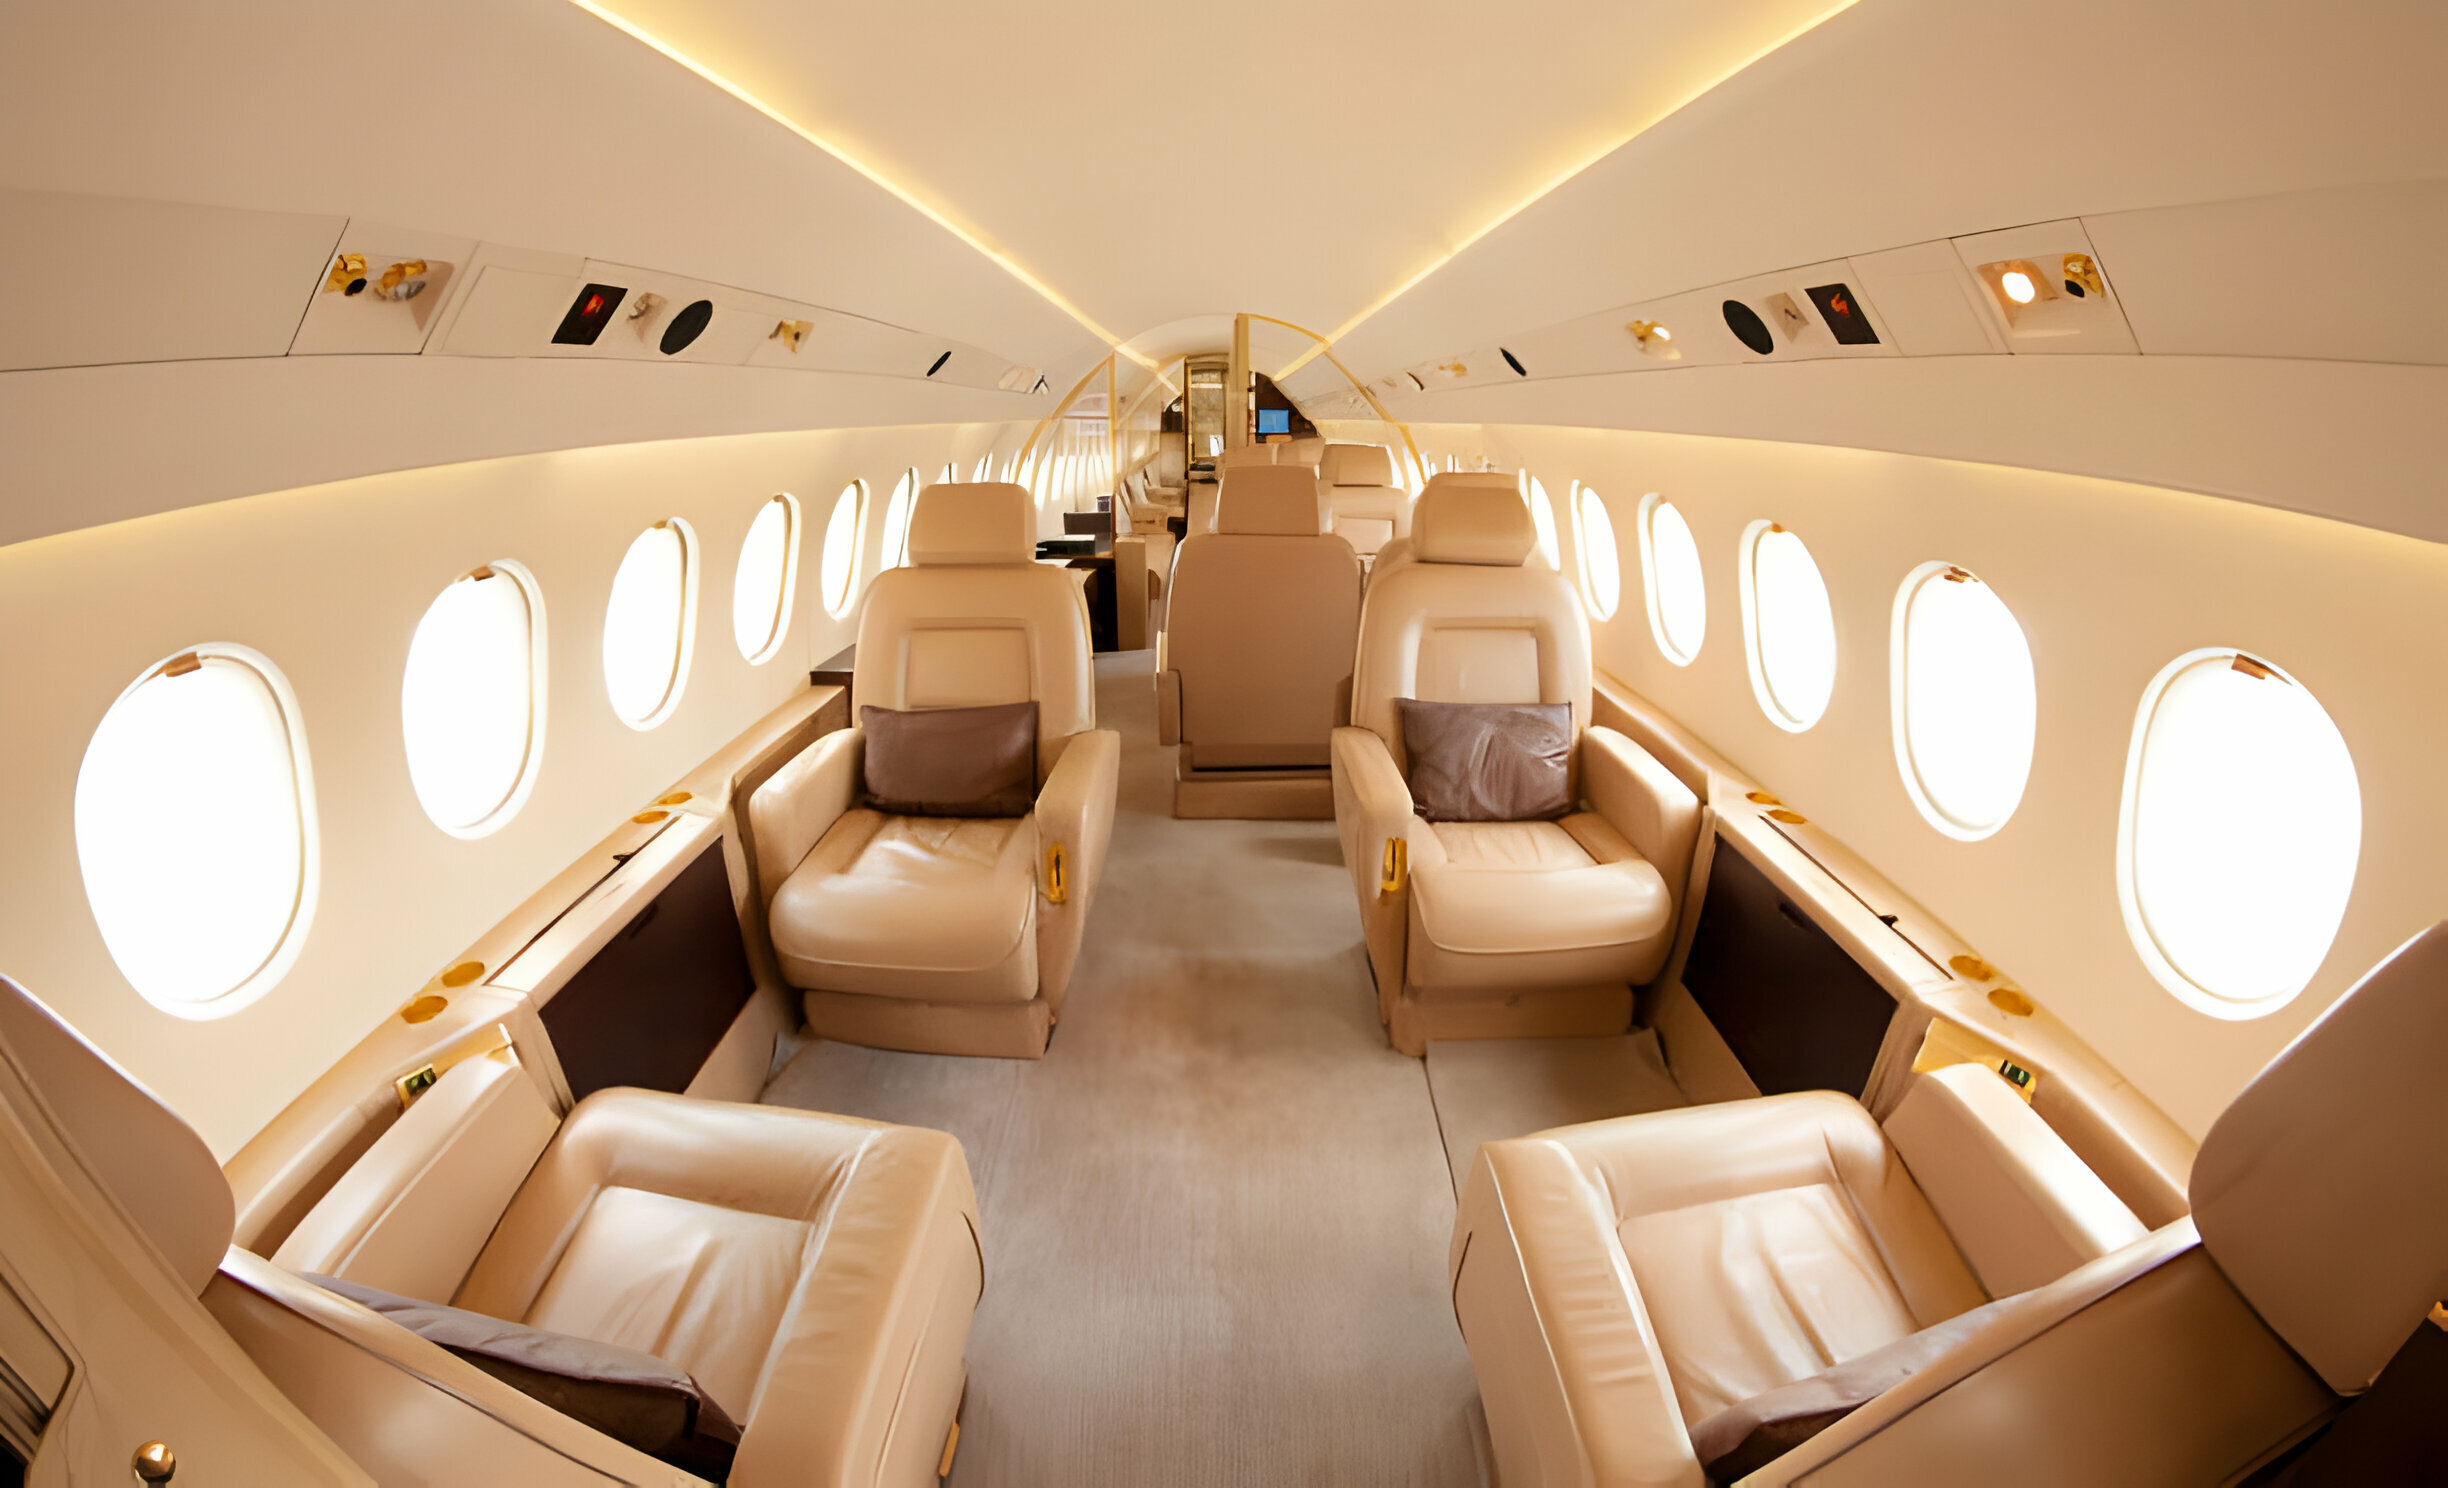 8-10 seater private jet Private jet charter service company called FLY AVCARE